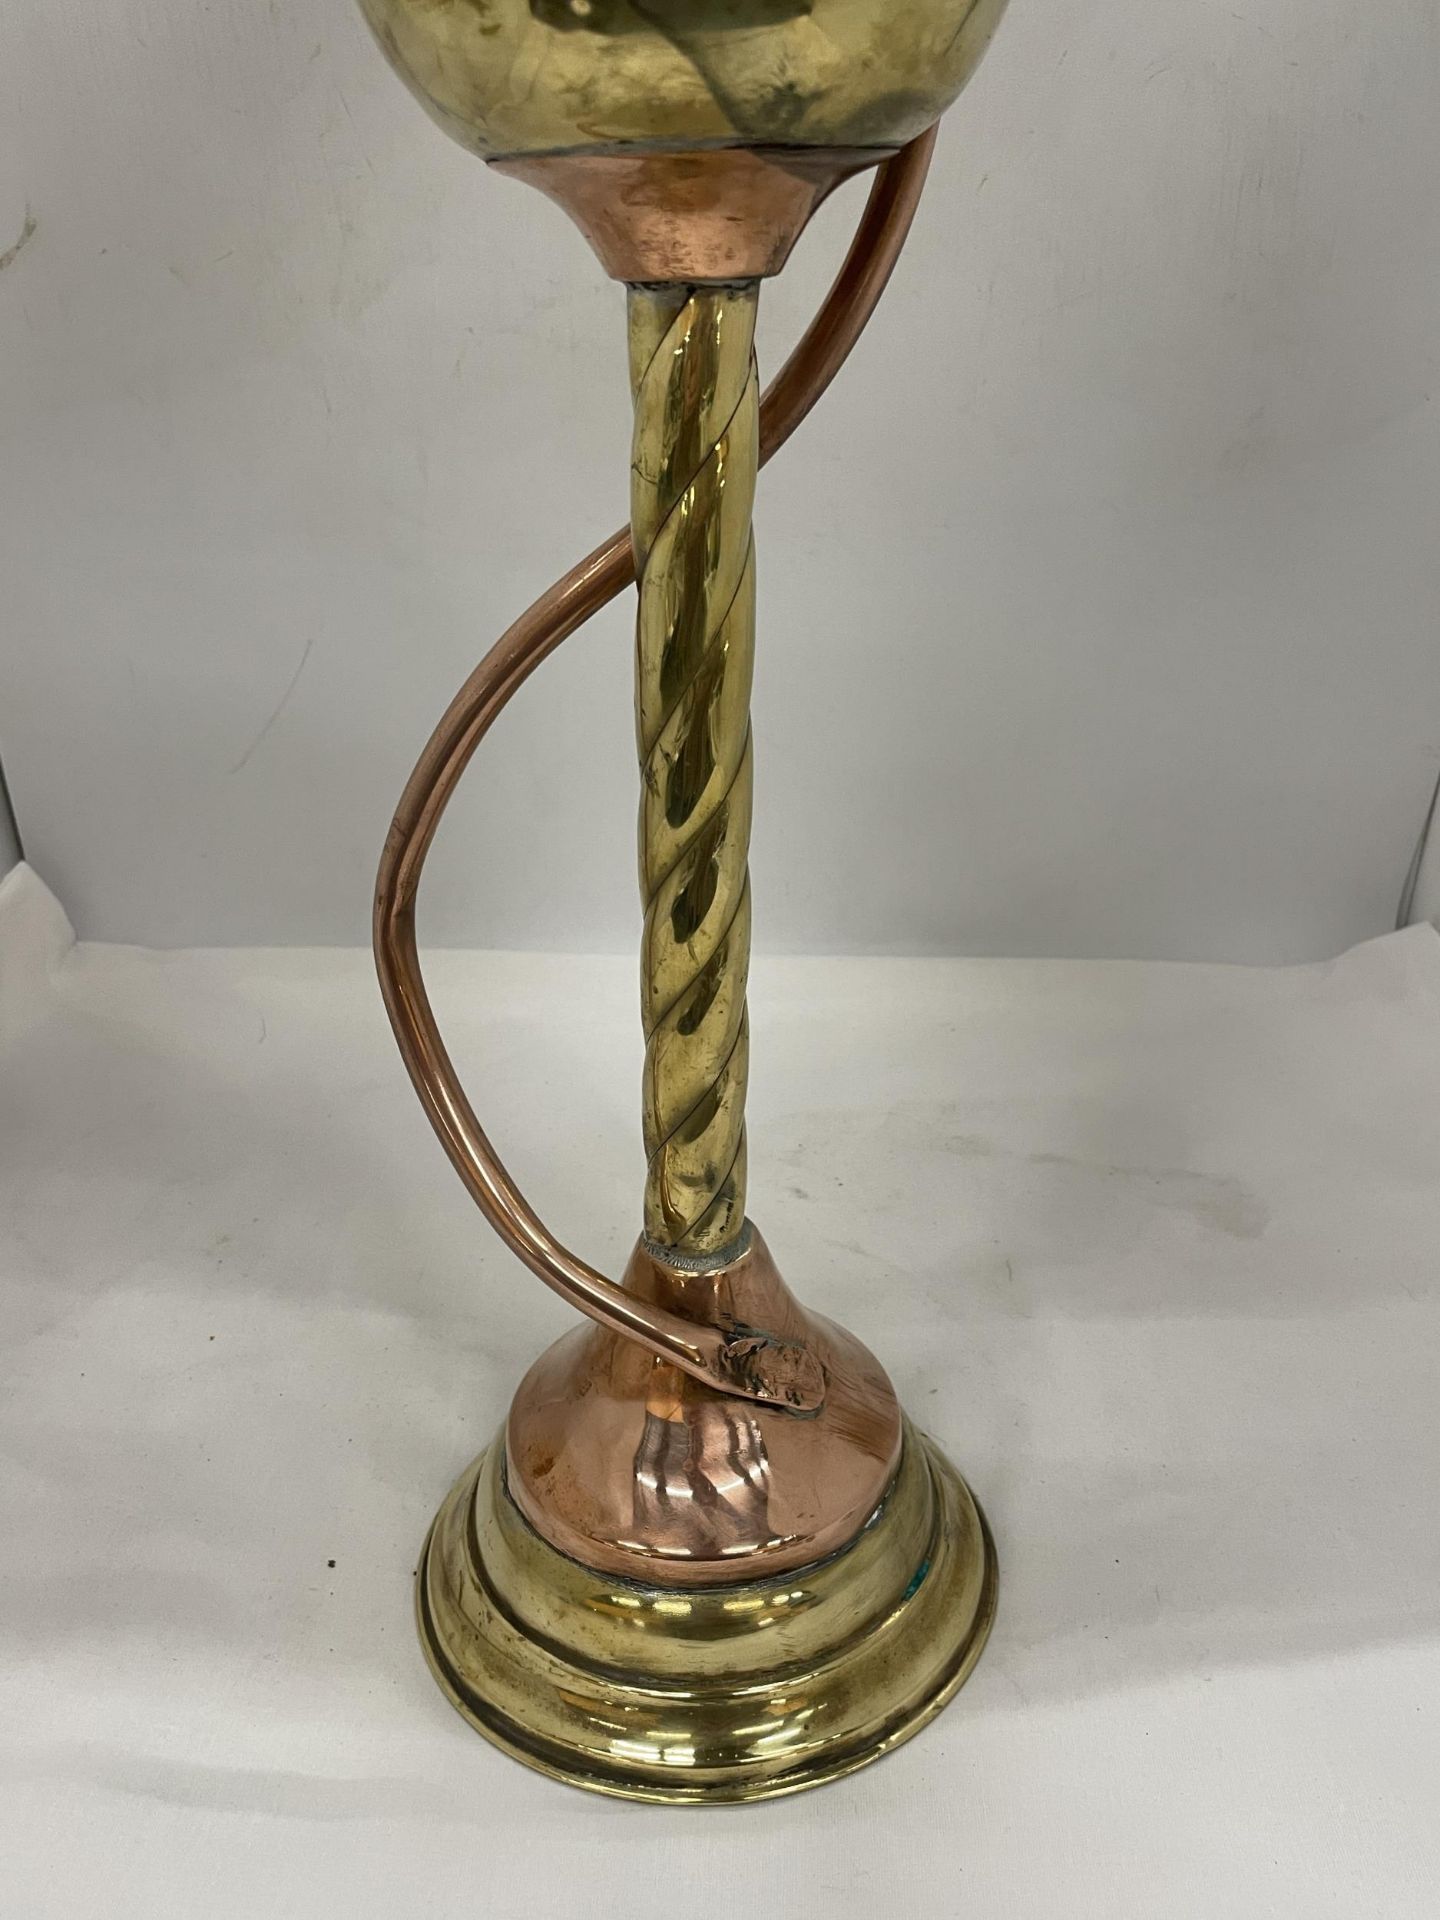 A VINTAGE OIL LAMP WITH MABER COLOURED GLASS SHADE, GLASS FUNNEL AND A BRASS AND COPPER TWISTED BASE - Image 4 of 4